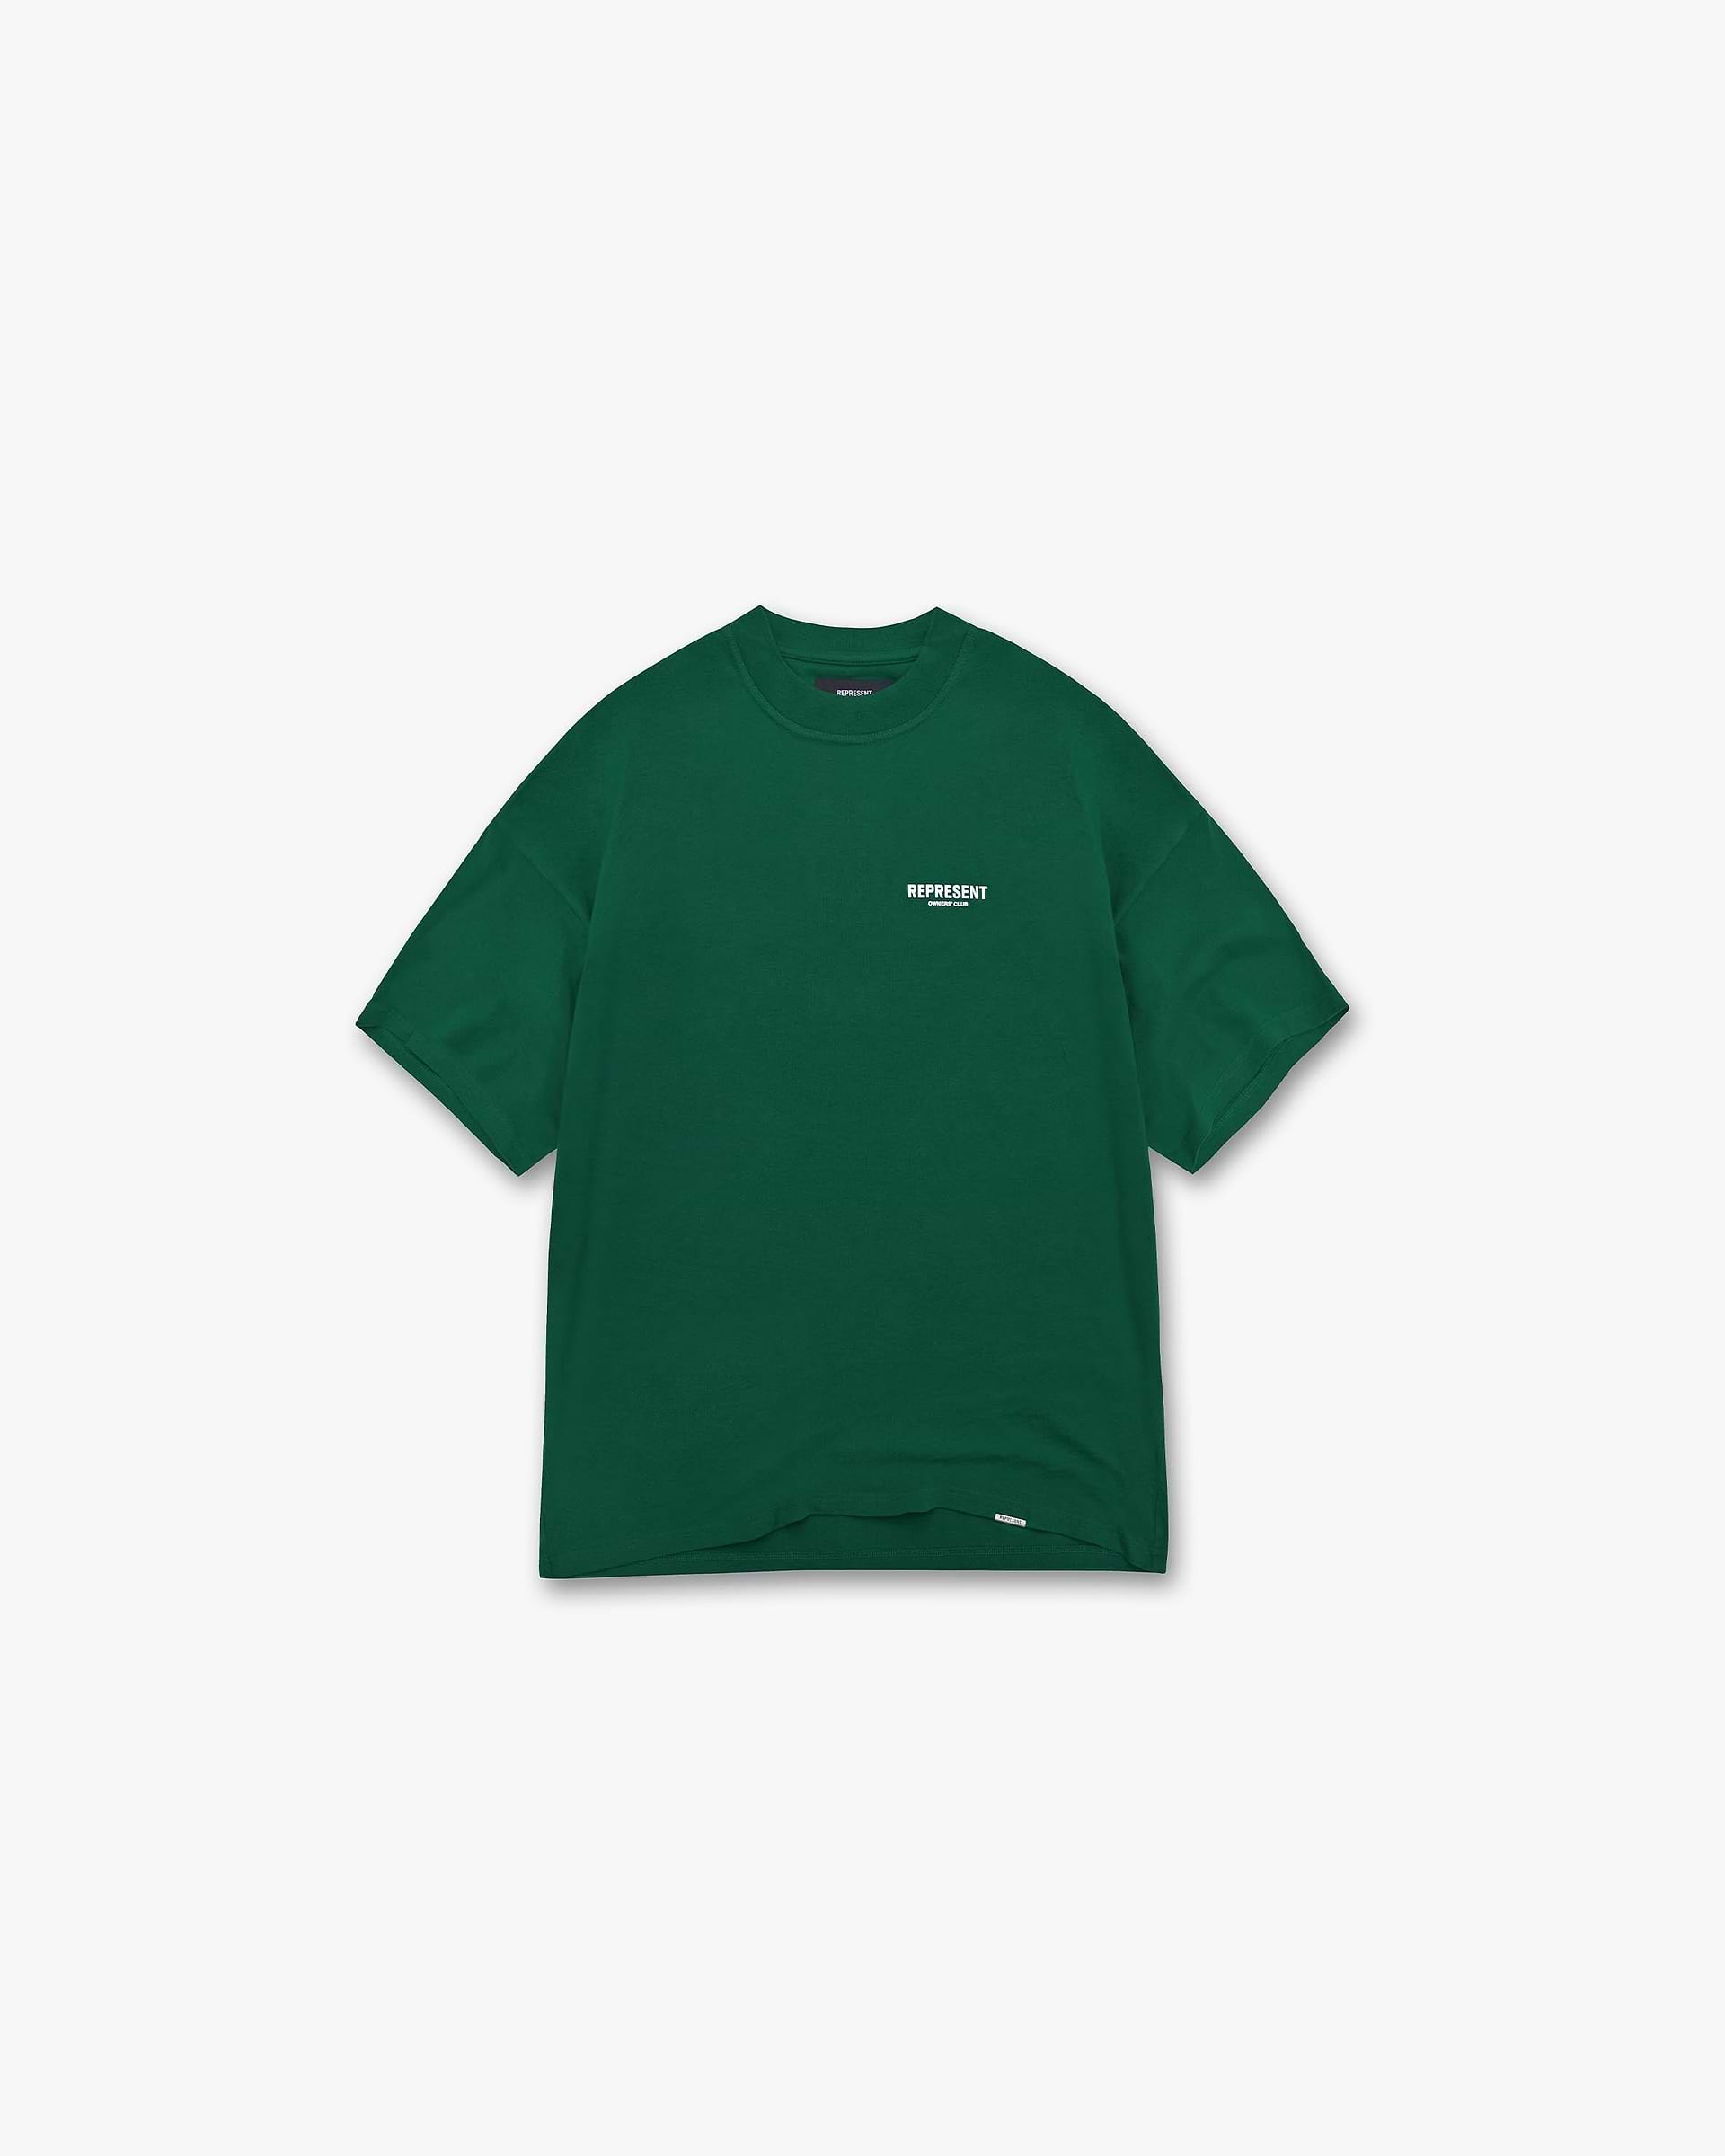 Represent Owners Club T-Shirt | Racing Green T-Shirts Owners Club | Represent Clo